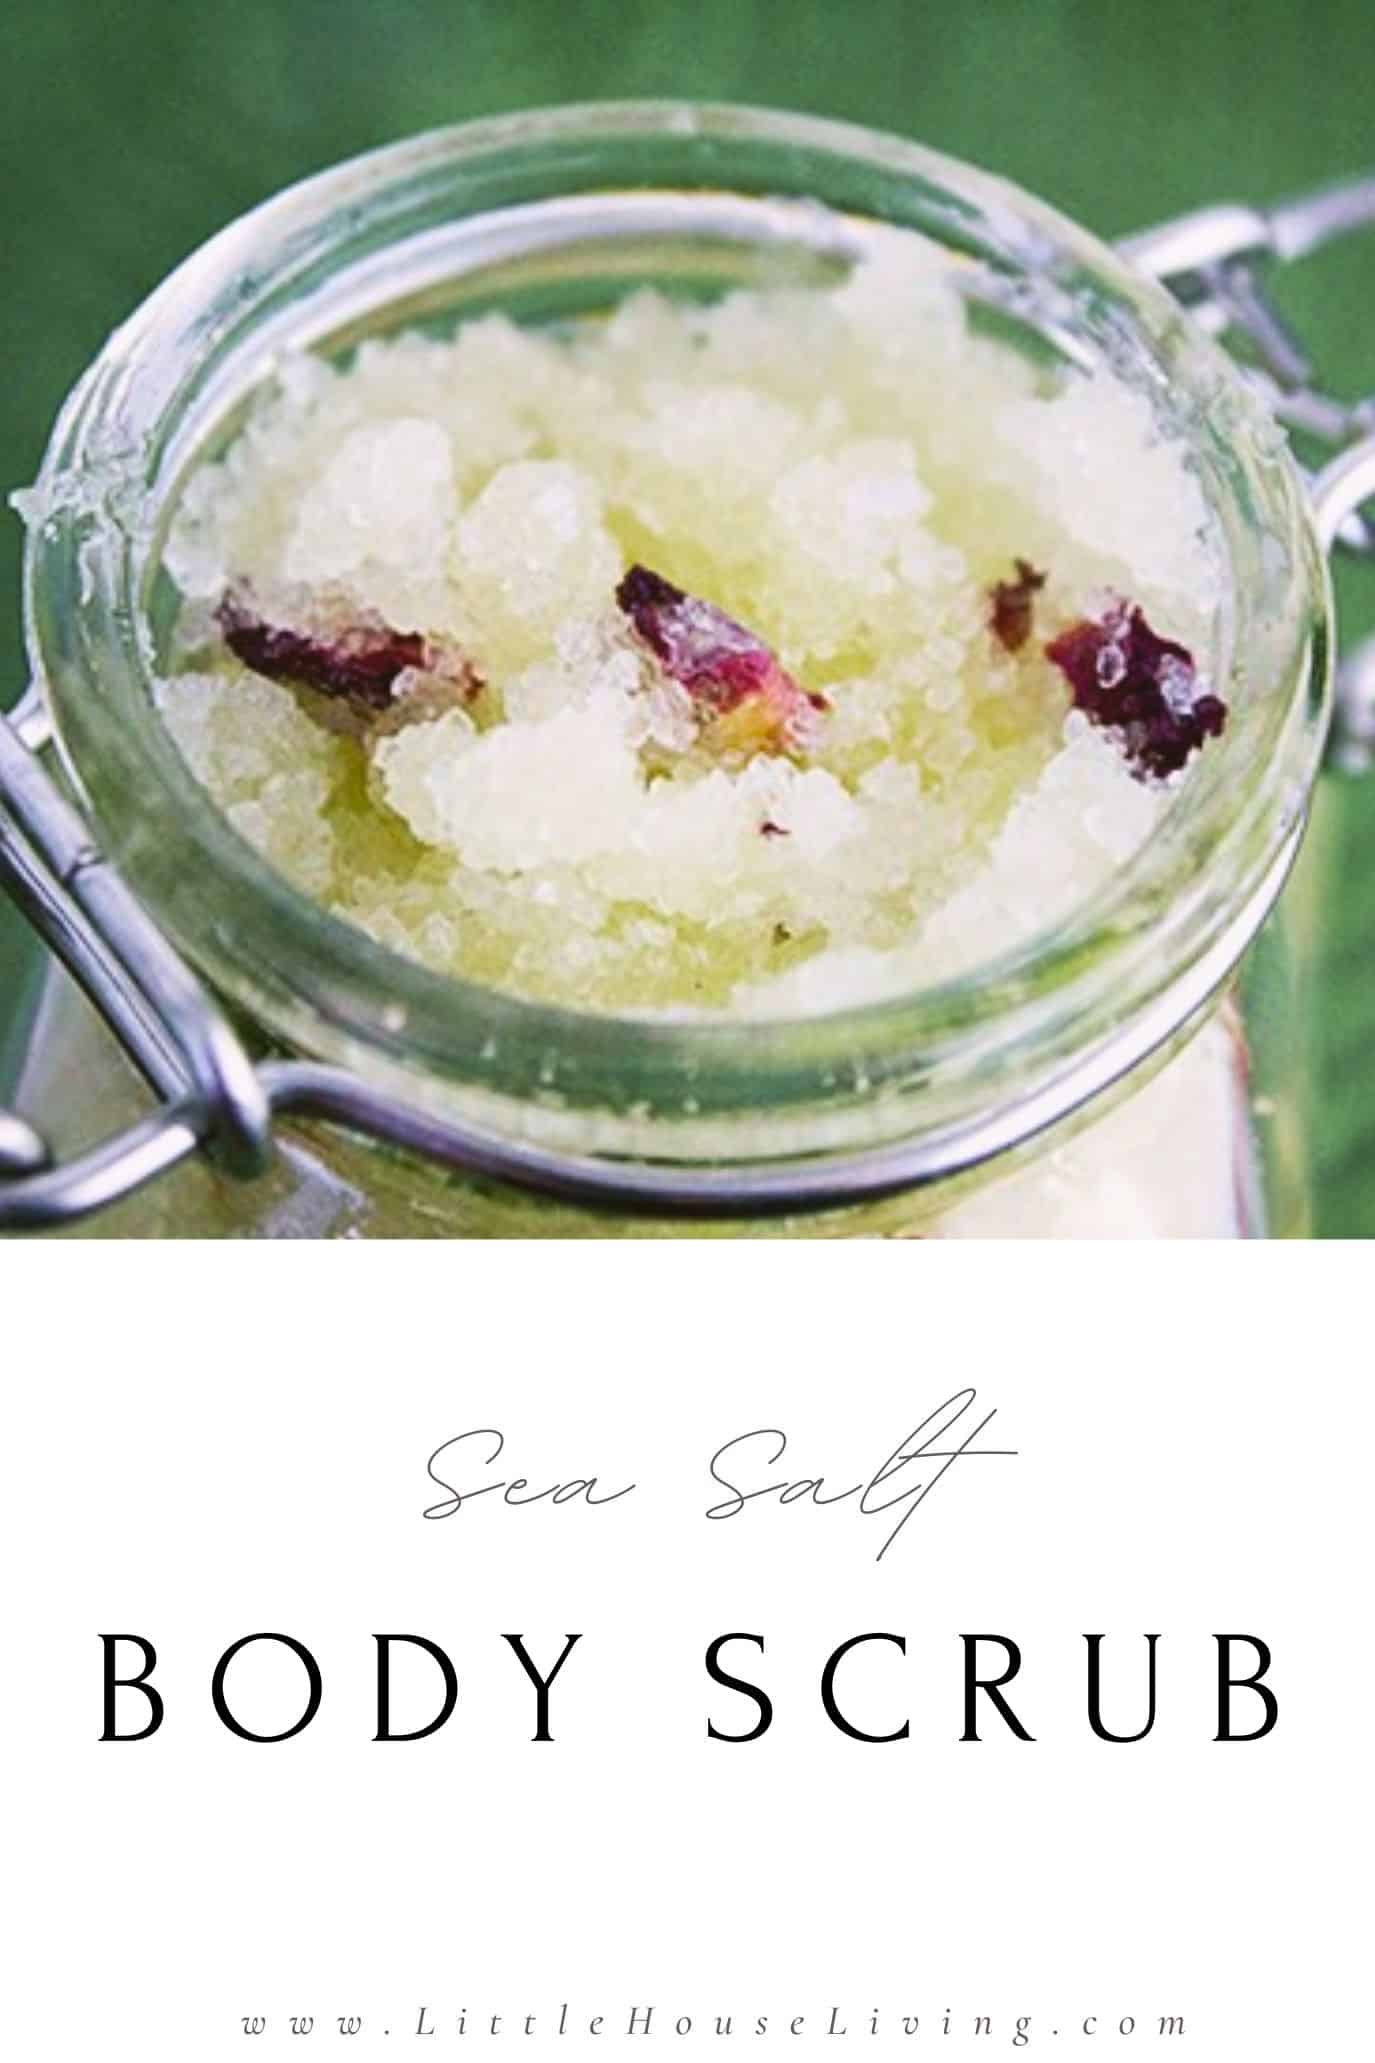 Need a lovely new Sea Salt Body Scrub to add to your exfoliating routine? Or perhaps you need a unique gift for a friend. You will love this simple recipe!